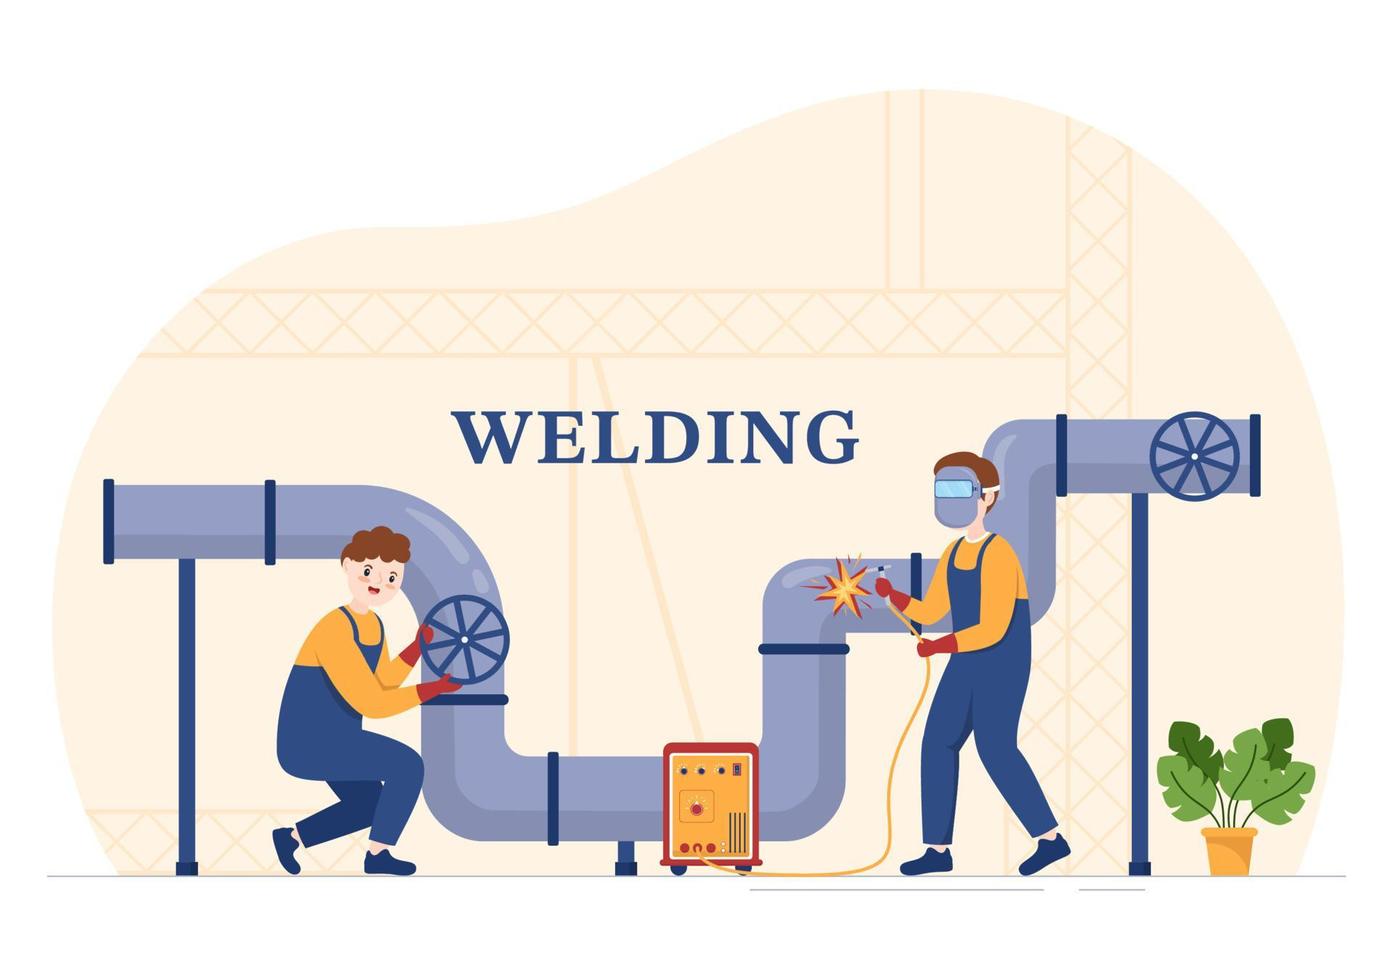 Welding Service with Professional Welder Job Weld Metal Structures, Pipe and Steel Construction in Flat Cartoon Hand Drawn Templates Illustration vector